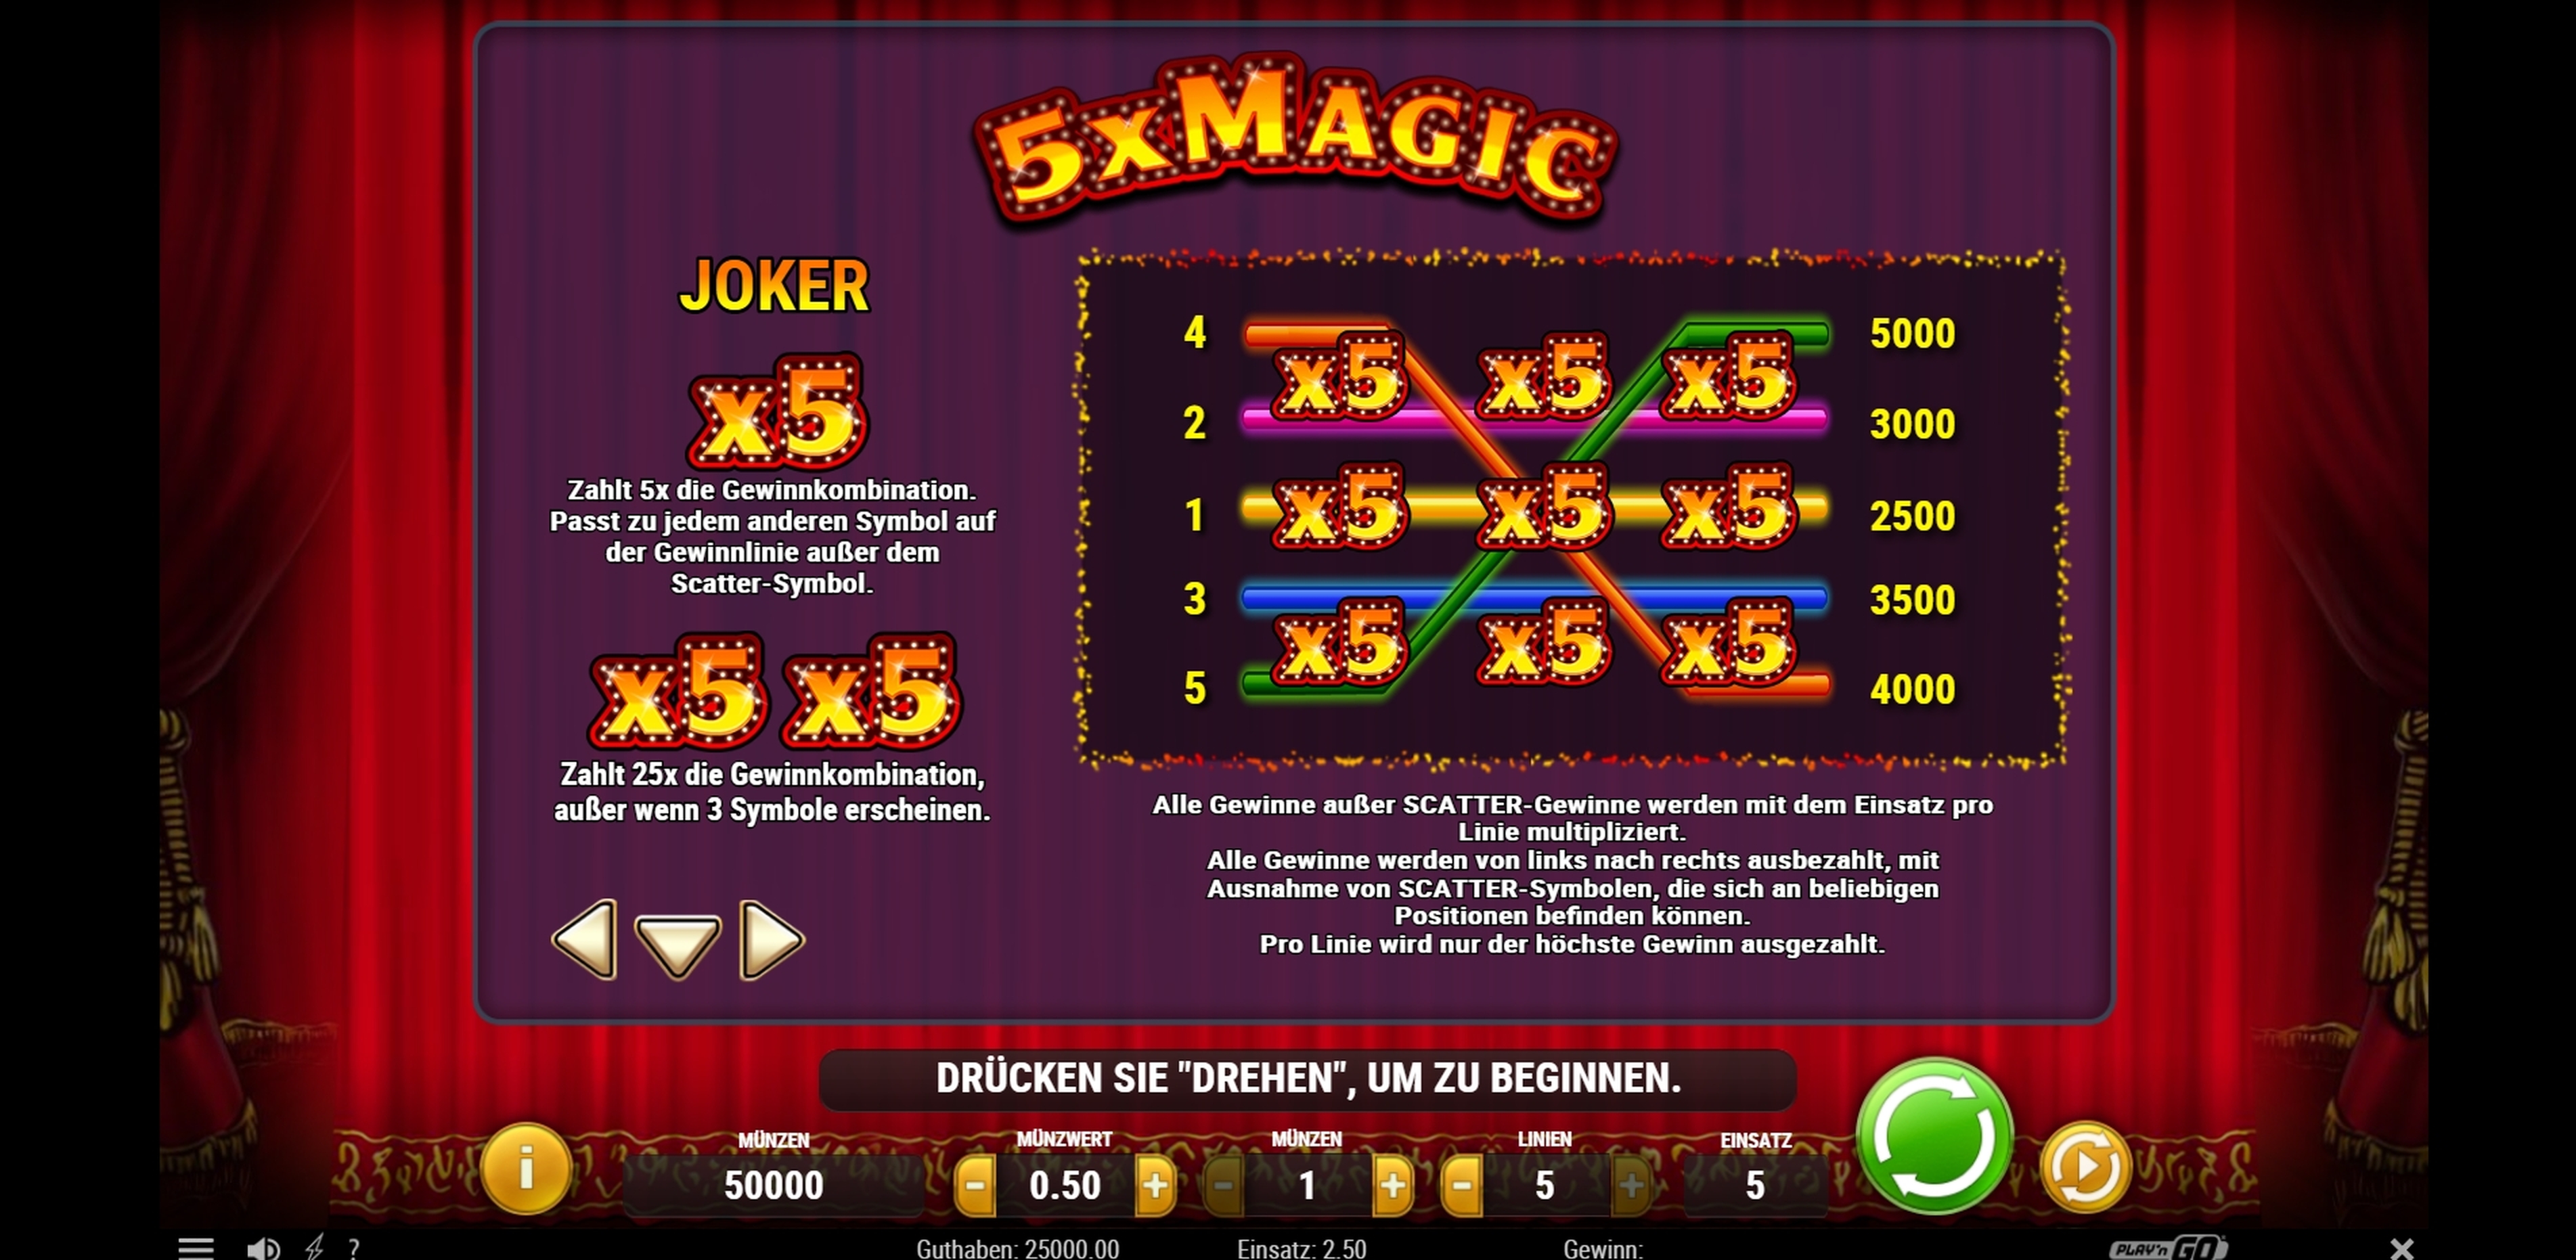 Info of 5x Magic Slot Game by Playn GO